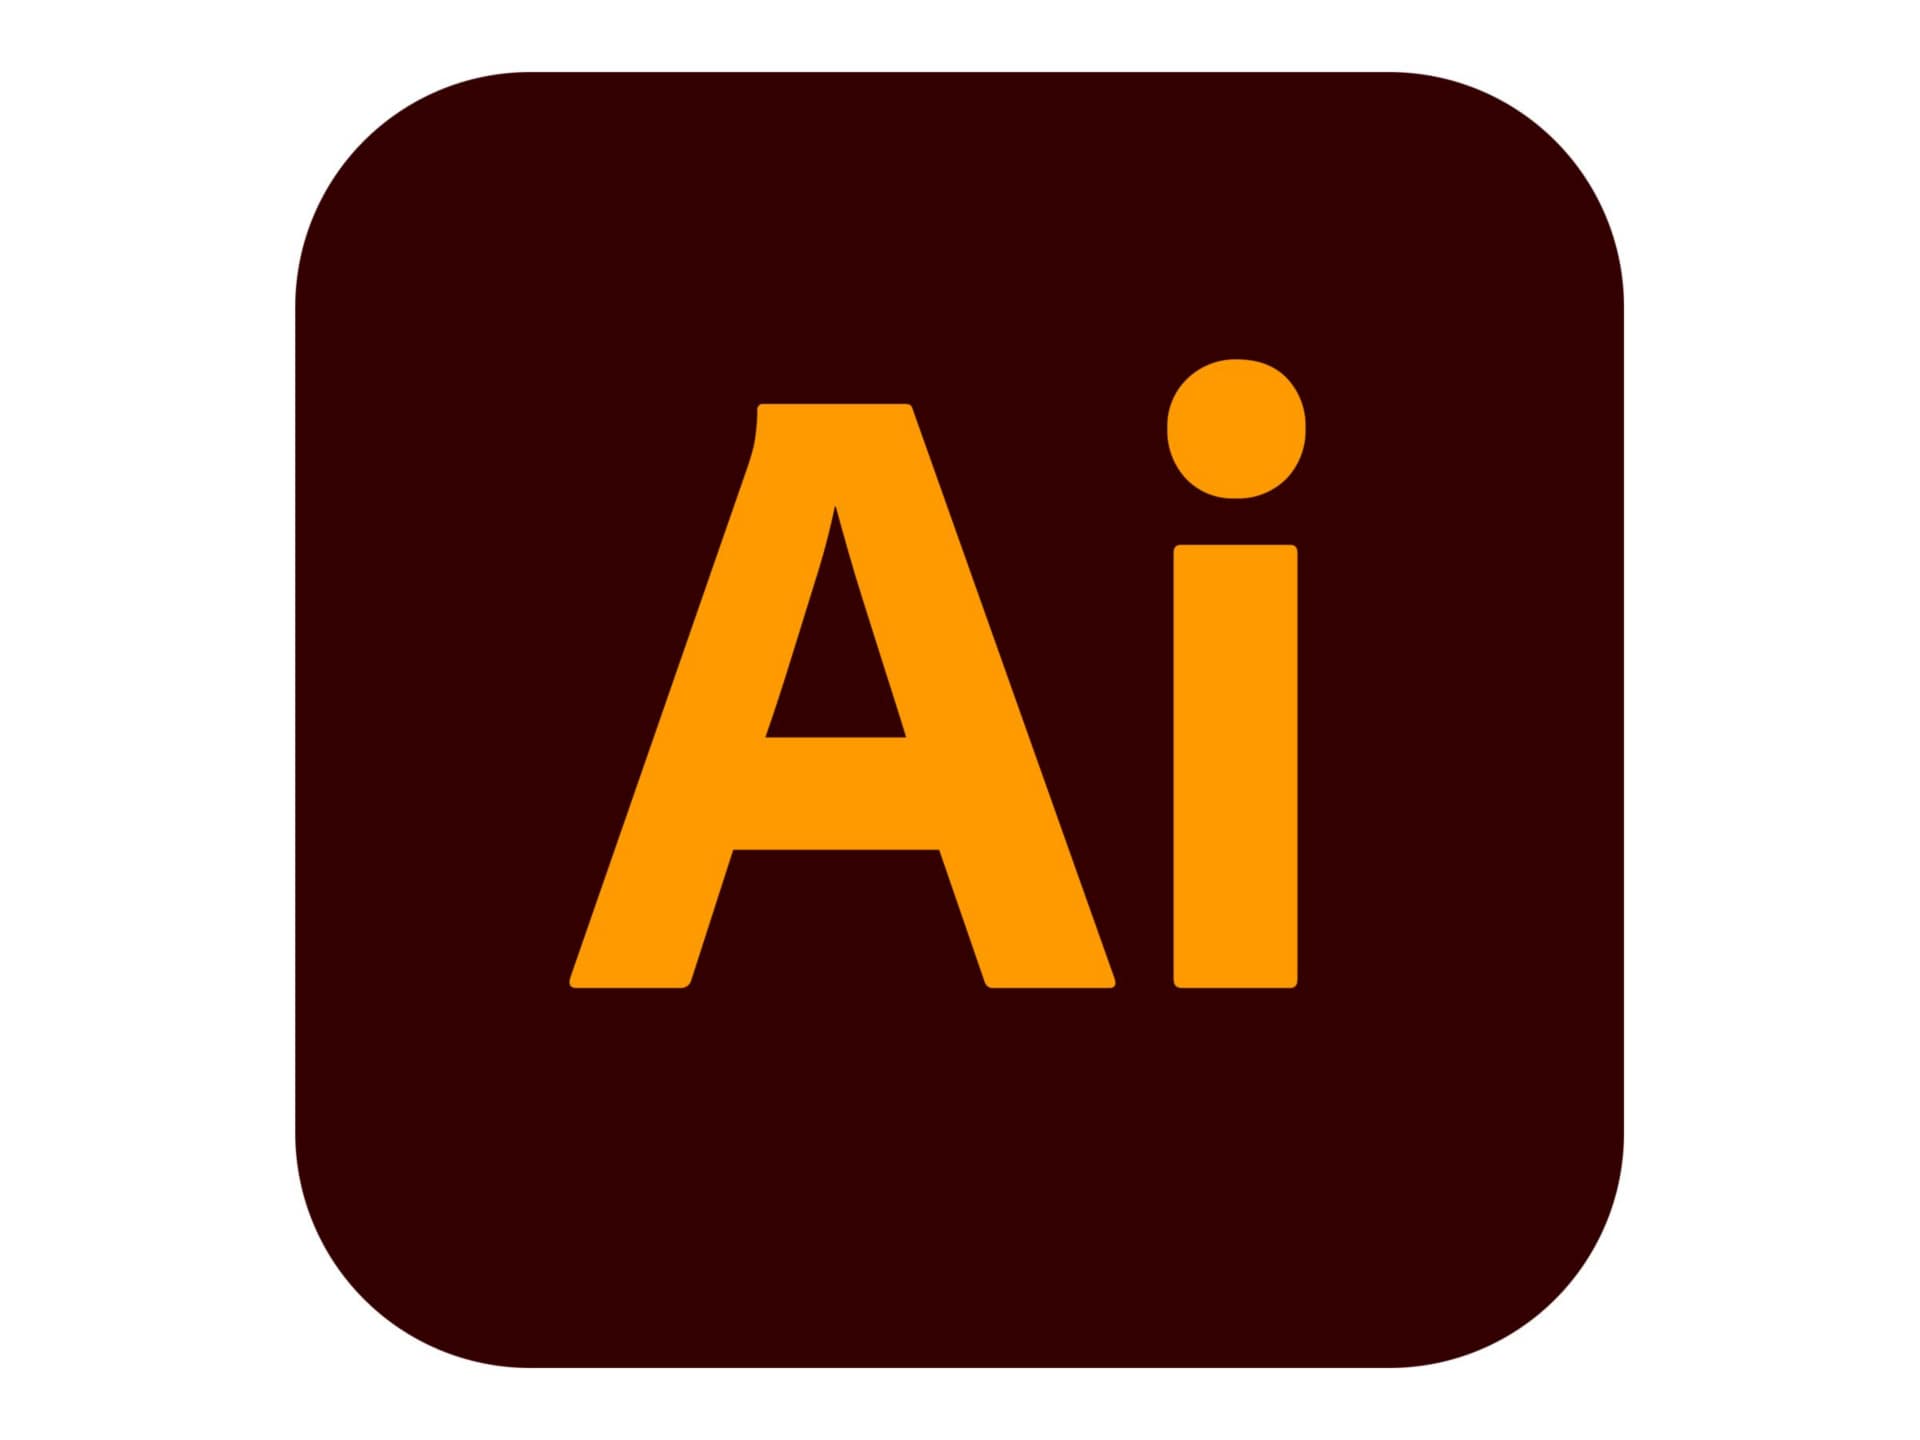 Adobe Illustrator CC for teams - Subscription New (7 months) - 1 named user